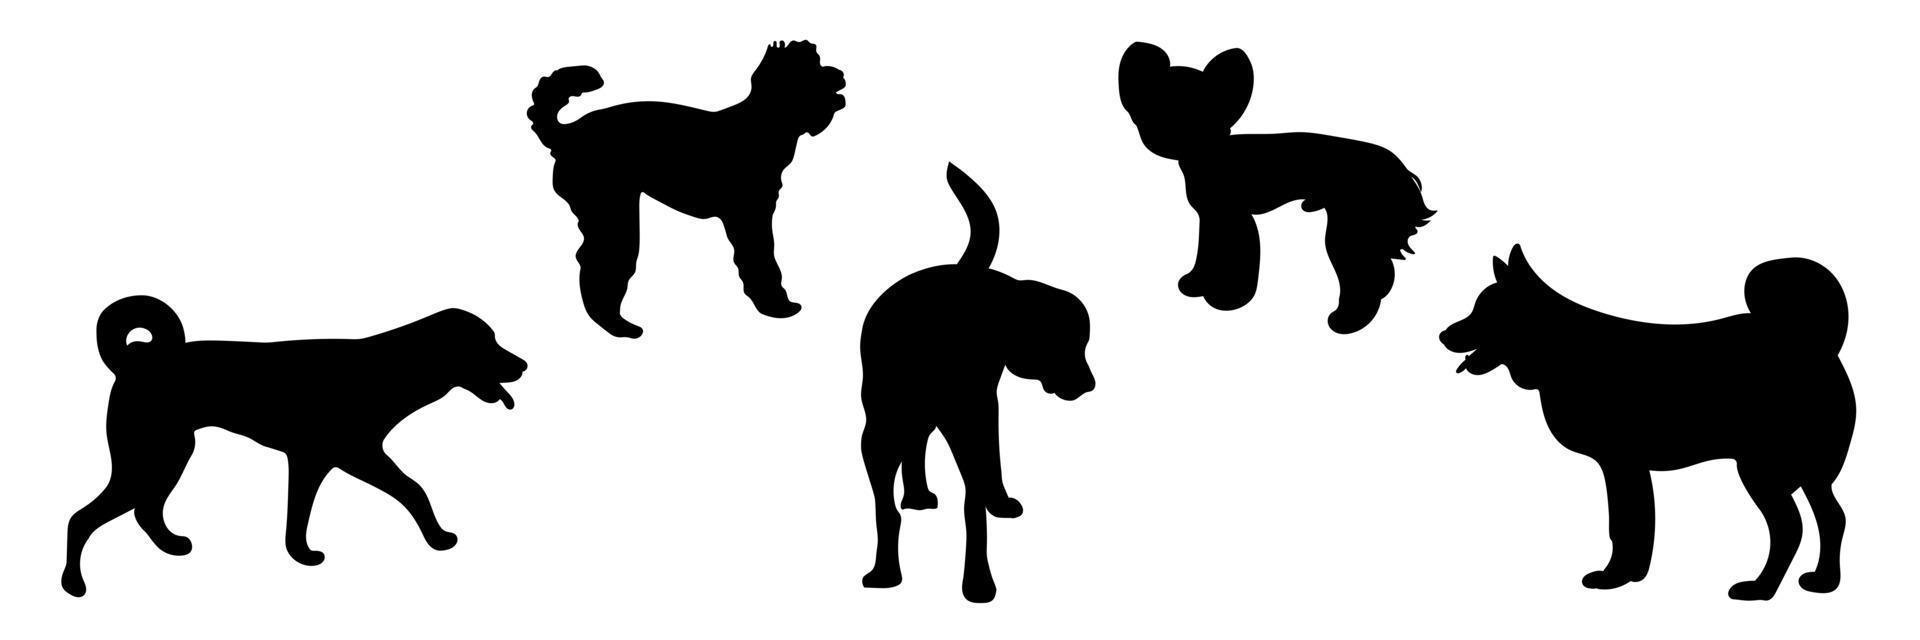 Silhouettes of dogs in different poses, set silhouettes of animals vector